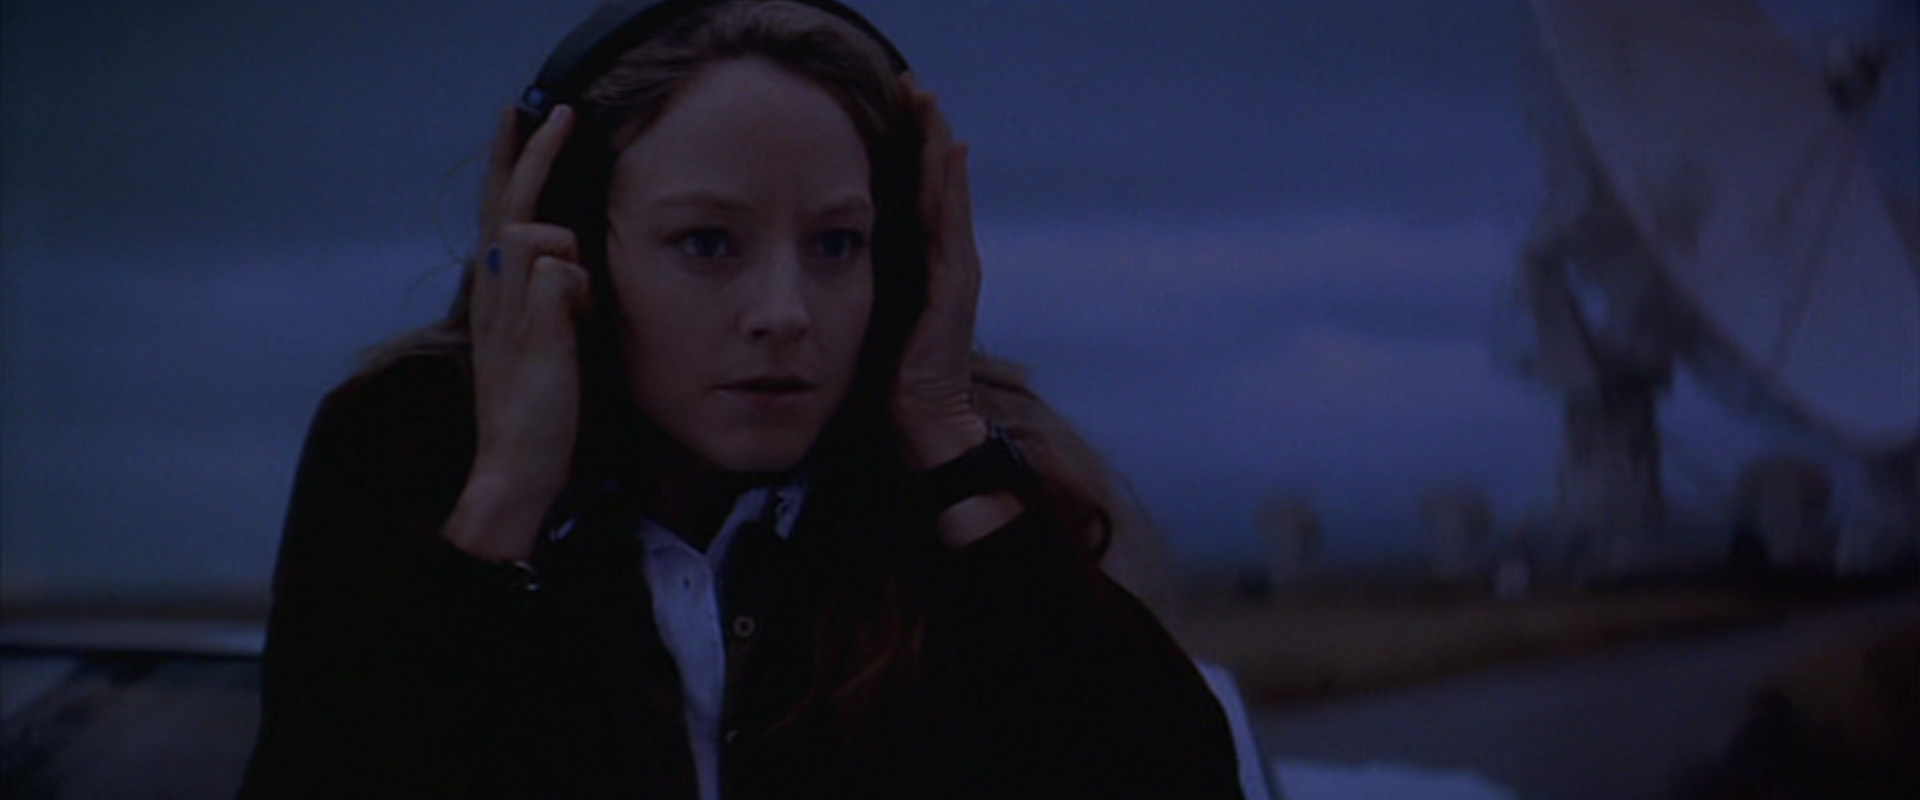 contact_jodie-foster_02.png